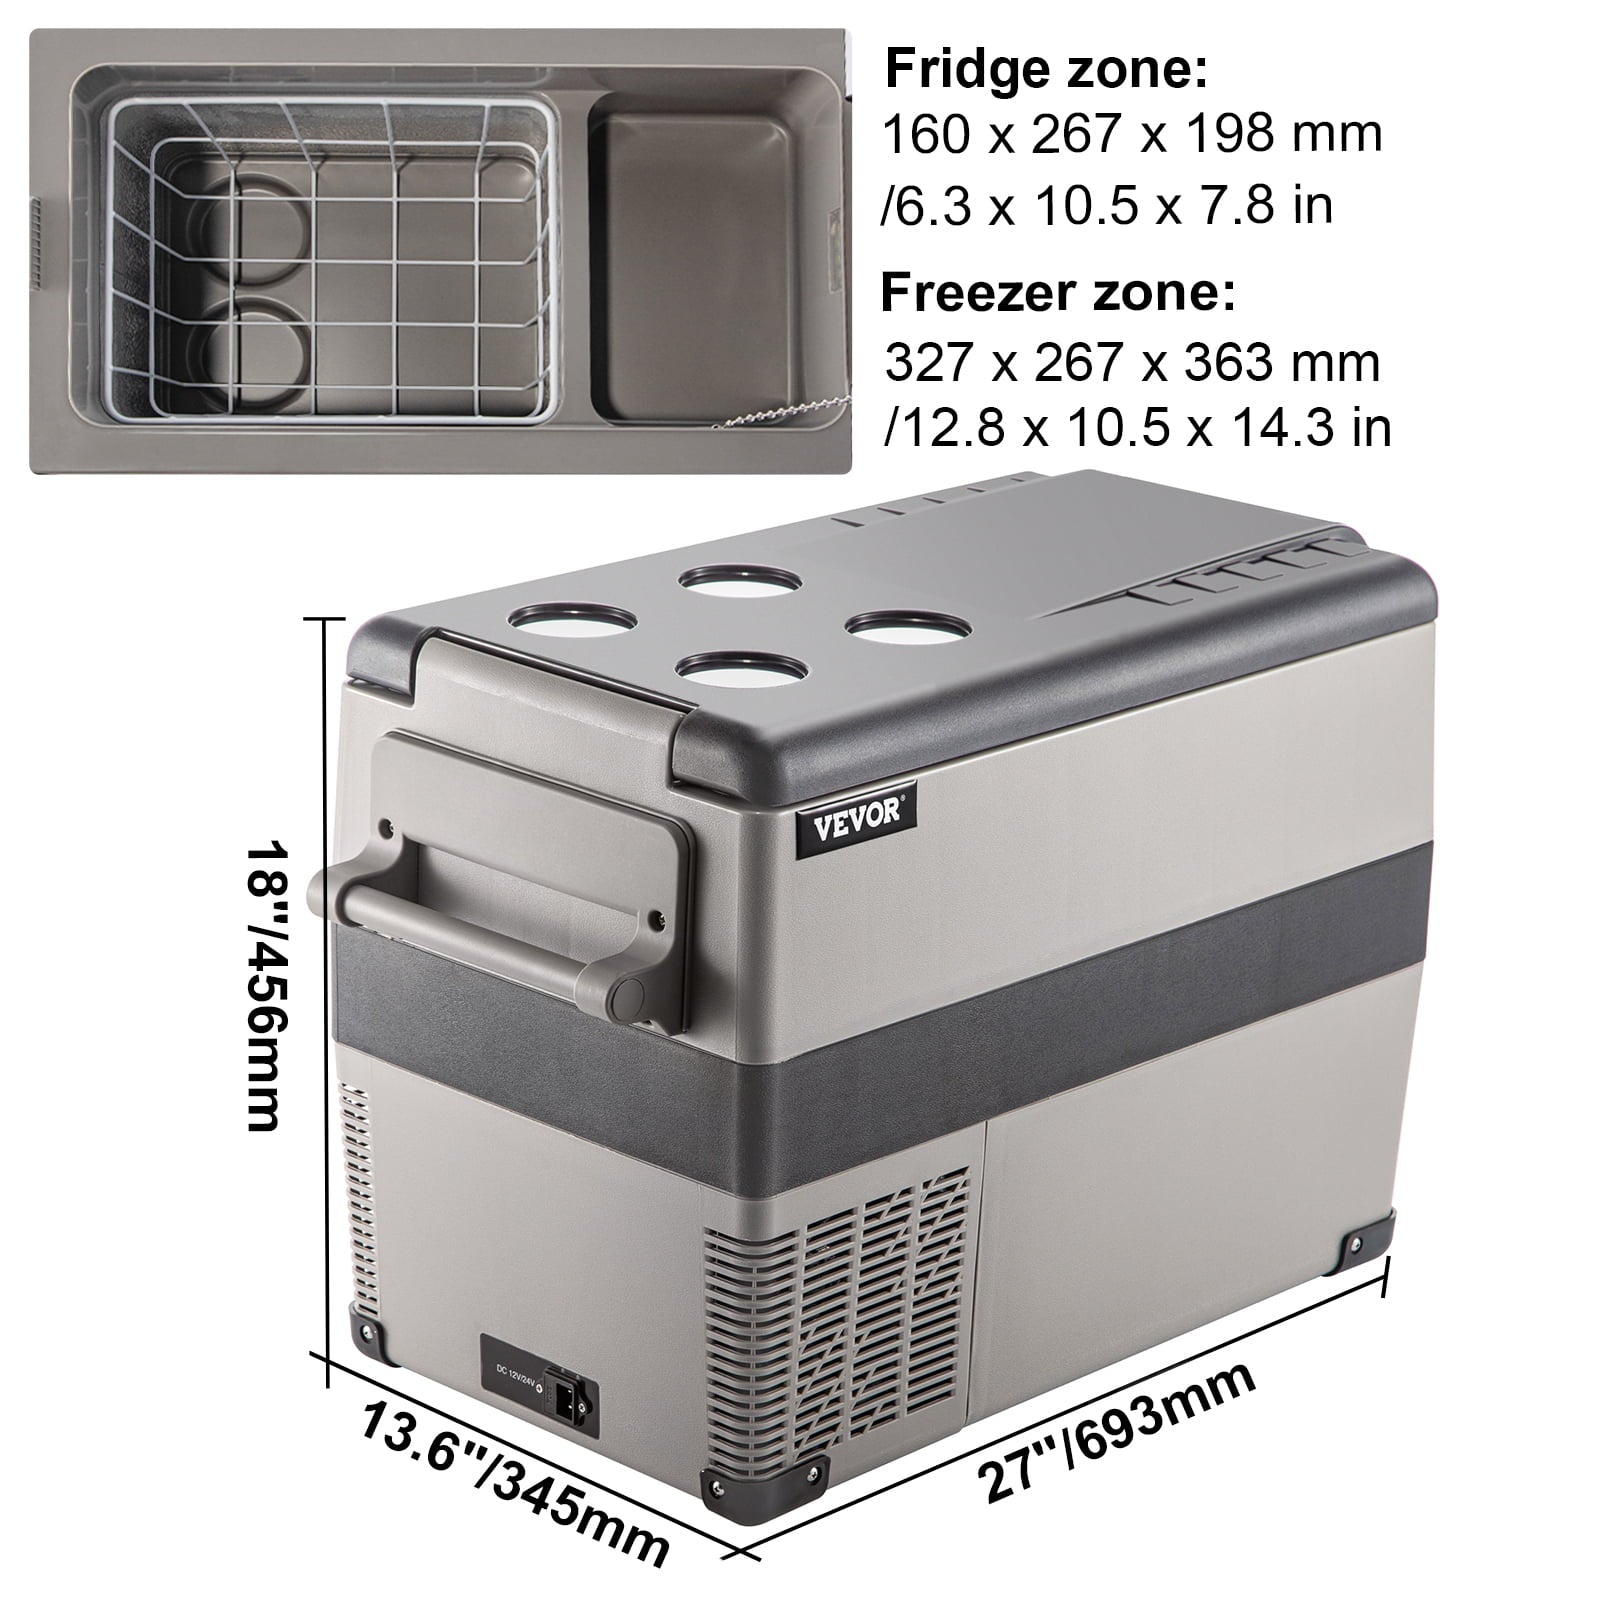 VEVORbrand 45L Portable Car Refrigerator 48 Quart Compact RV Fridge 12/24V DC & 110-240V AC Vehicle Car Truck Boat Mini Electric Cooler for Driving Travel Fishing Outdoor and Home Use -4°F-50°F